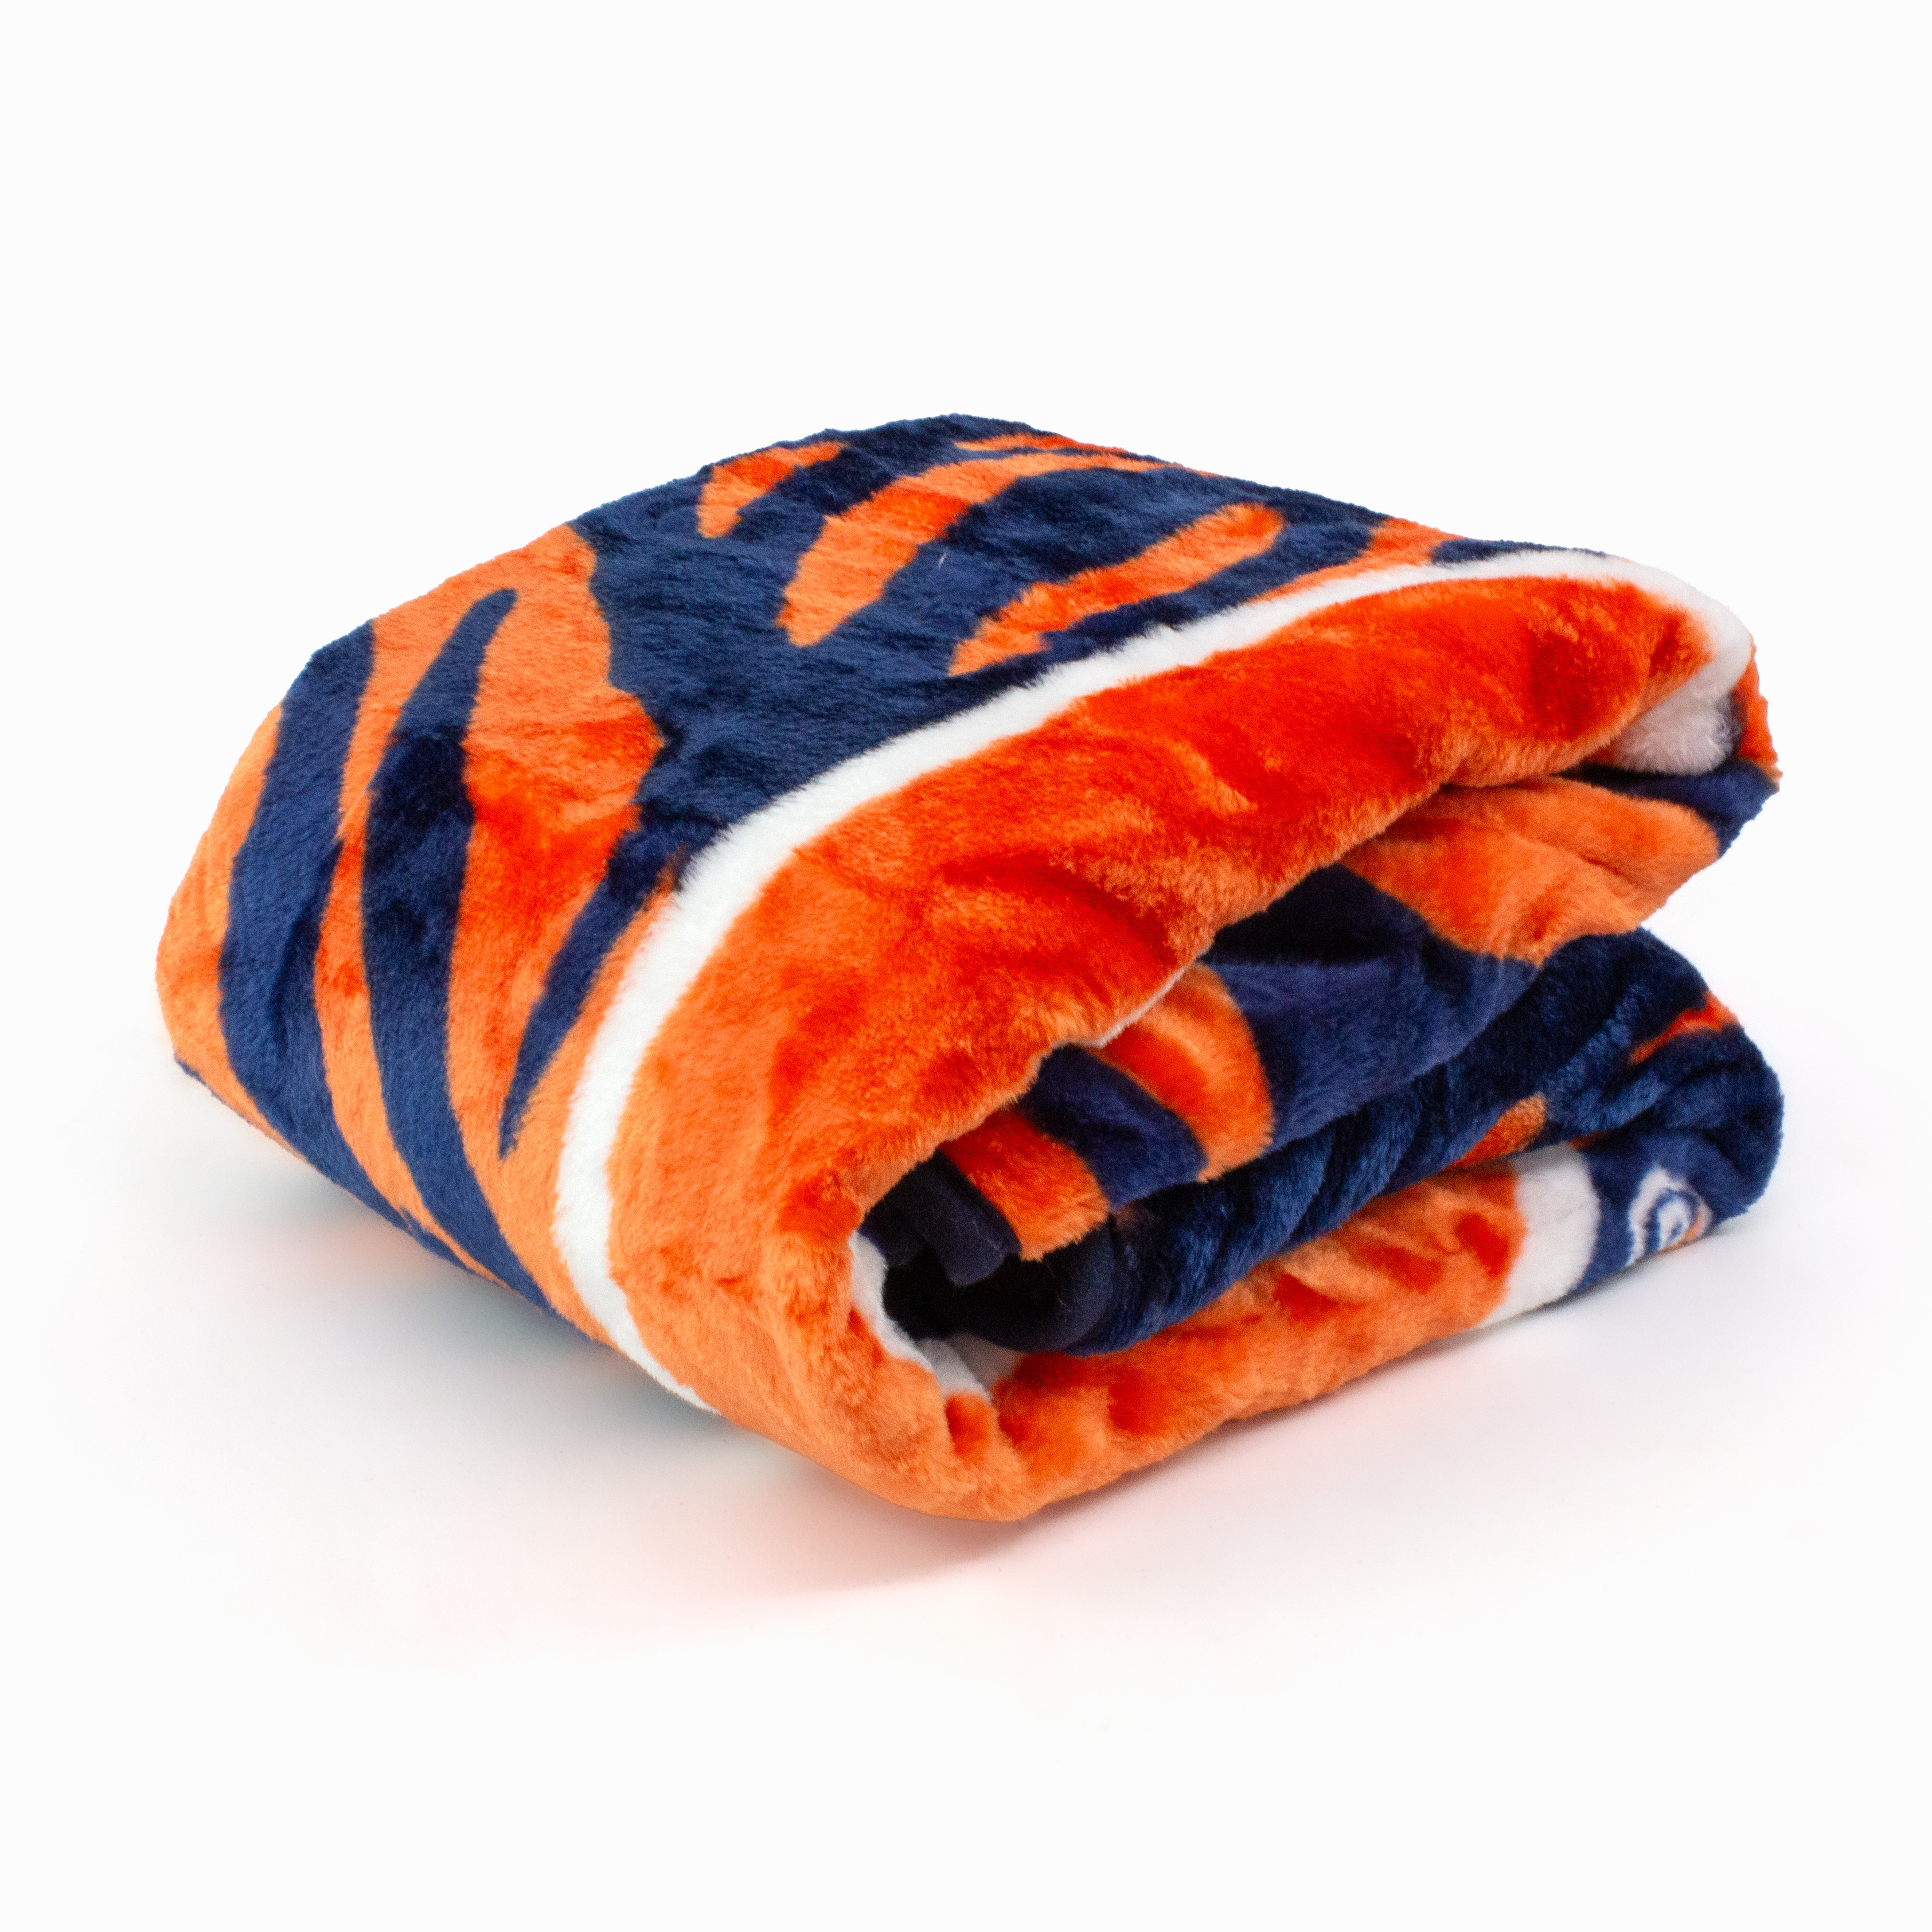 College Covers Everything Comfy Auburn Tigers Soft Raschel Throw Blanket, 60" x 50" - image 4 of 8